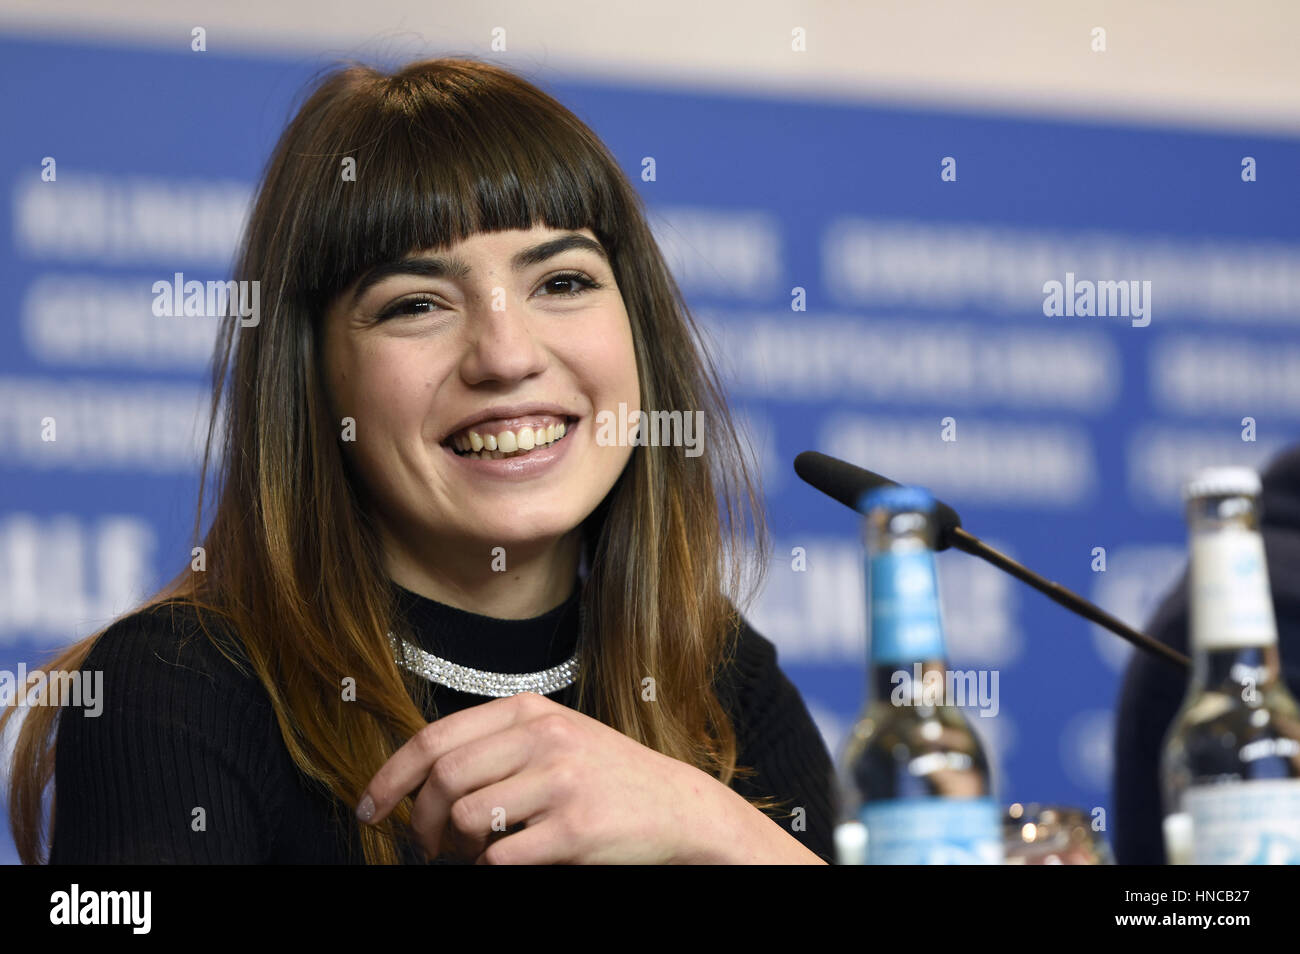 Berlin, Germany. 10th Feb, 2017. Anjela Nedyalkova during the 'T2 Trainspotting' press conference at the 67th Berlin International Film Festival/Berlinale 2017 on February 10, 2017 in Berlin, Germany. | usage worldwide Credit: dpa/Alamy Live News Stock Photo